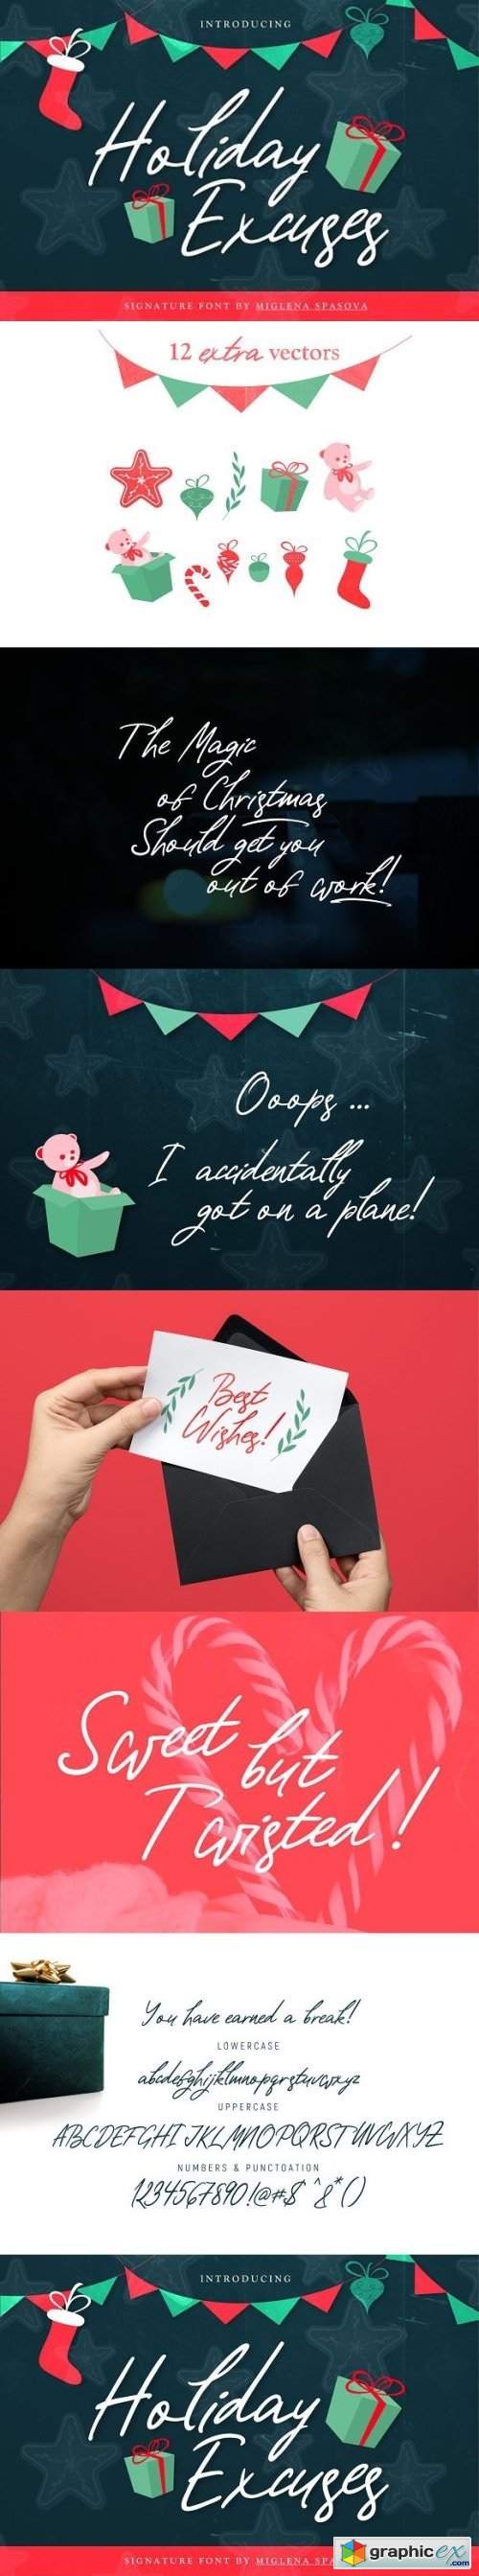 Holiday Excuses Vector Pack